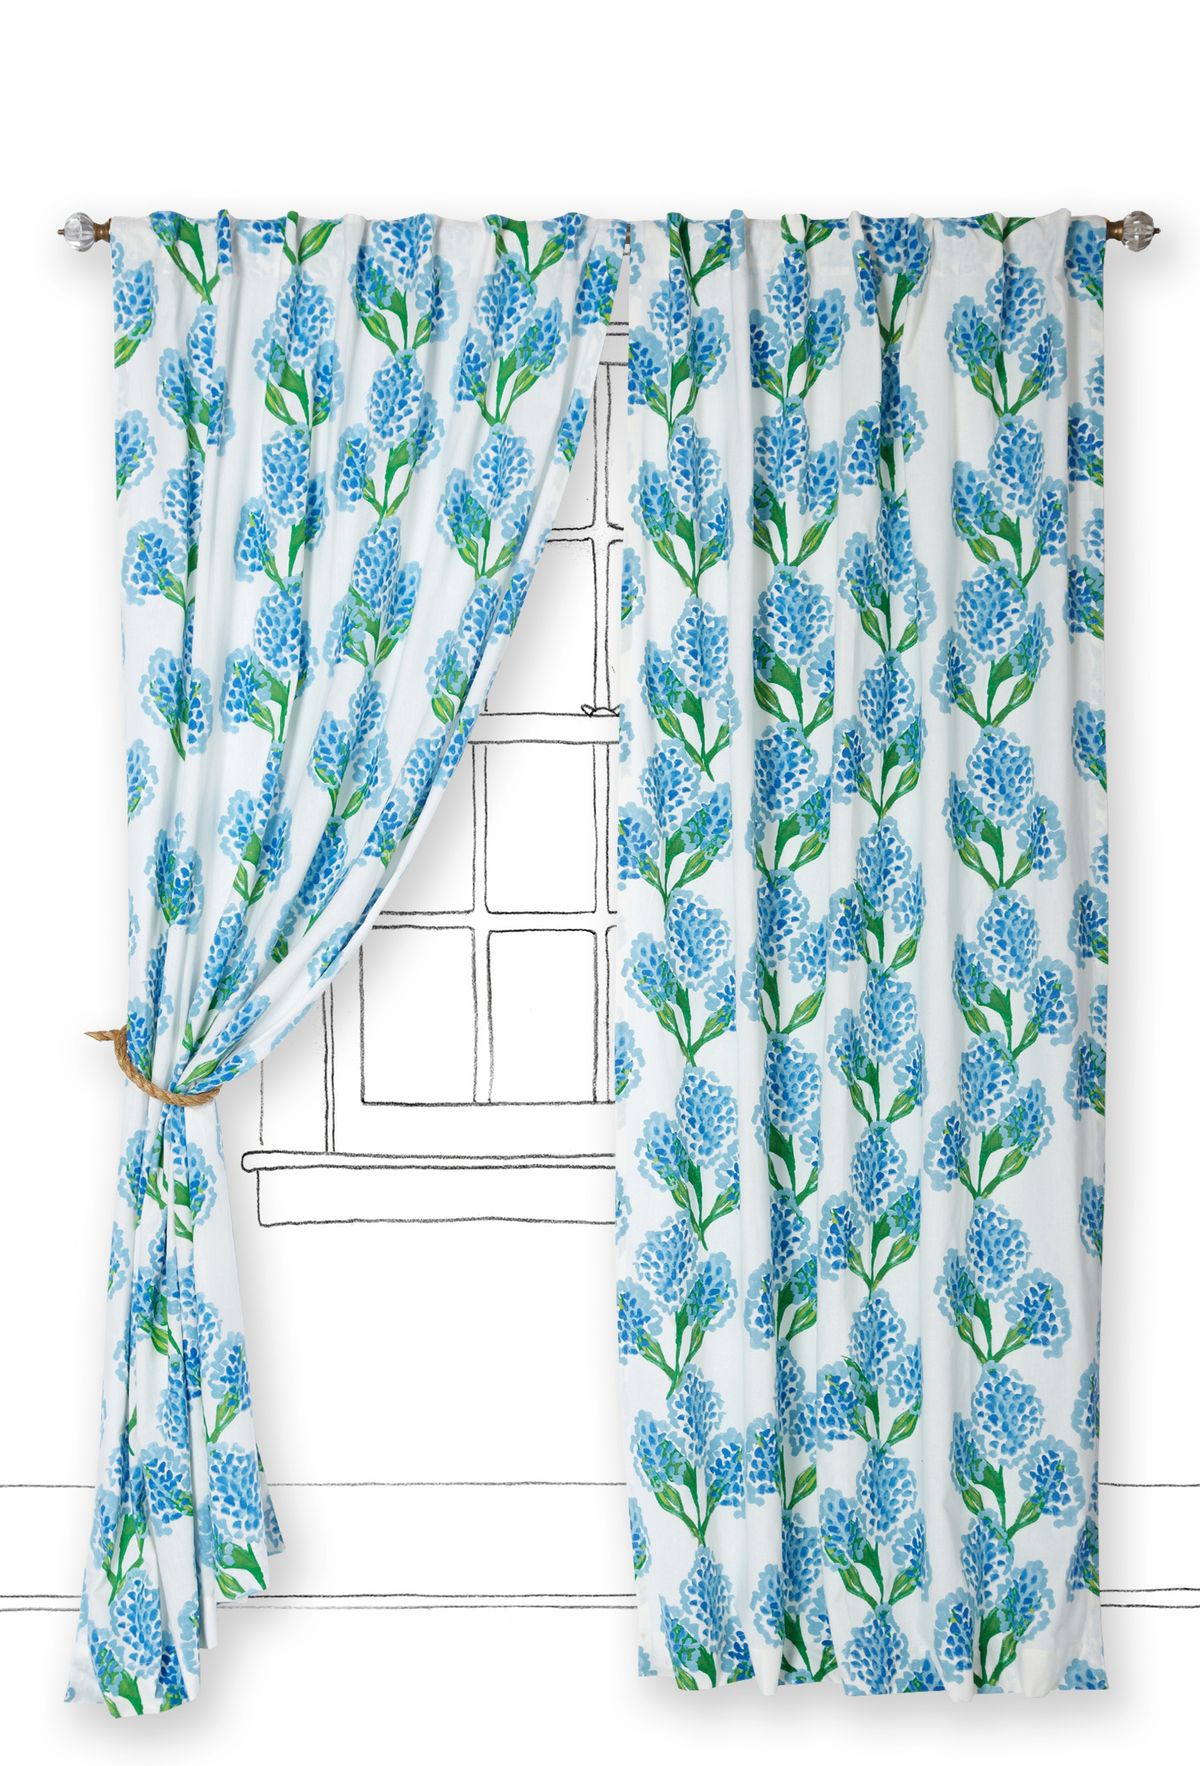 The Speckled Blooms curtain has a repeat of hyacinth flowers, perfect for early spring.